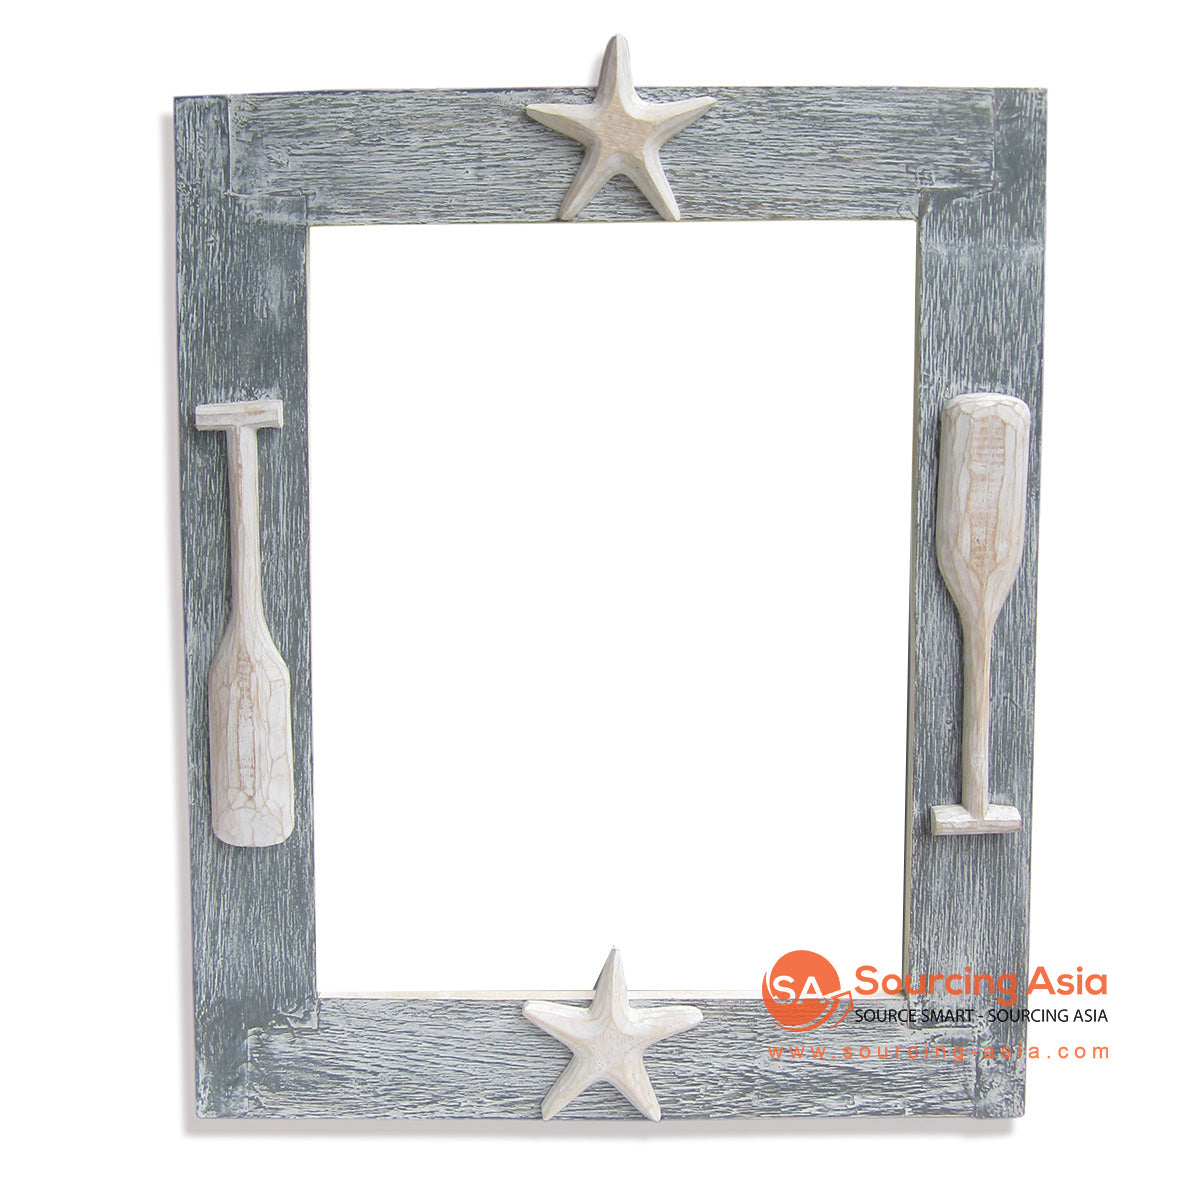 SKB014GY-41 GREY AND LIGHT WHITE WASH WOODEN FRAME WITH PADDLES AND STARFISH ORNAMENT